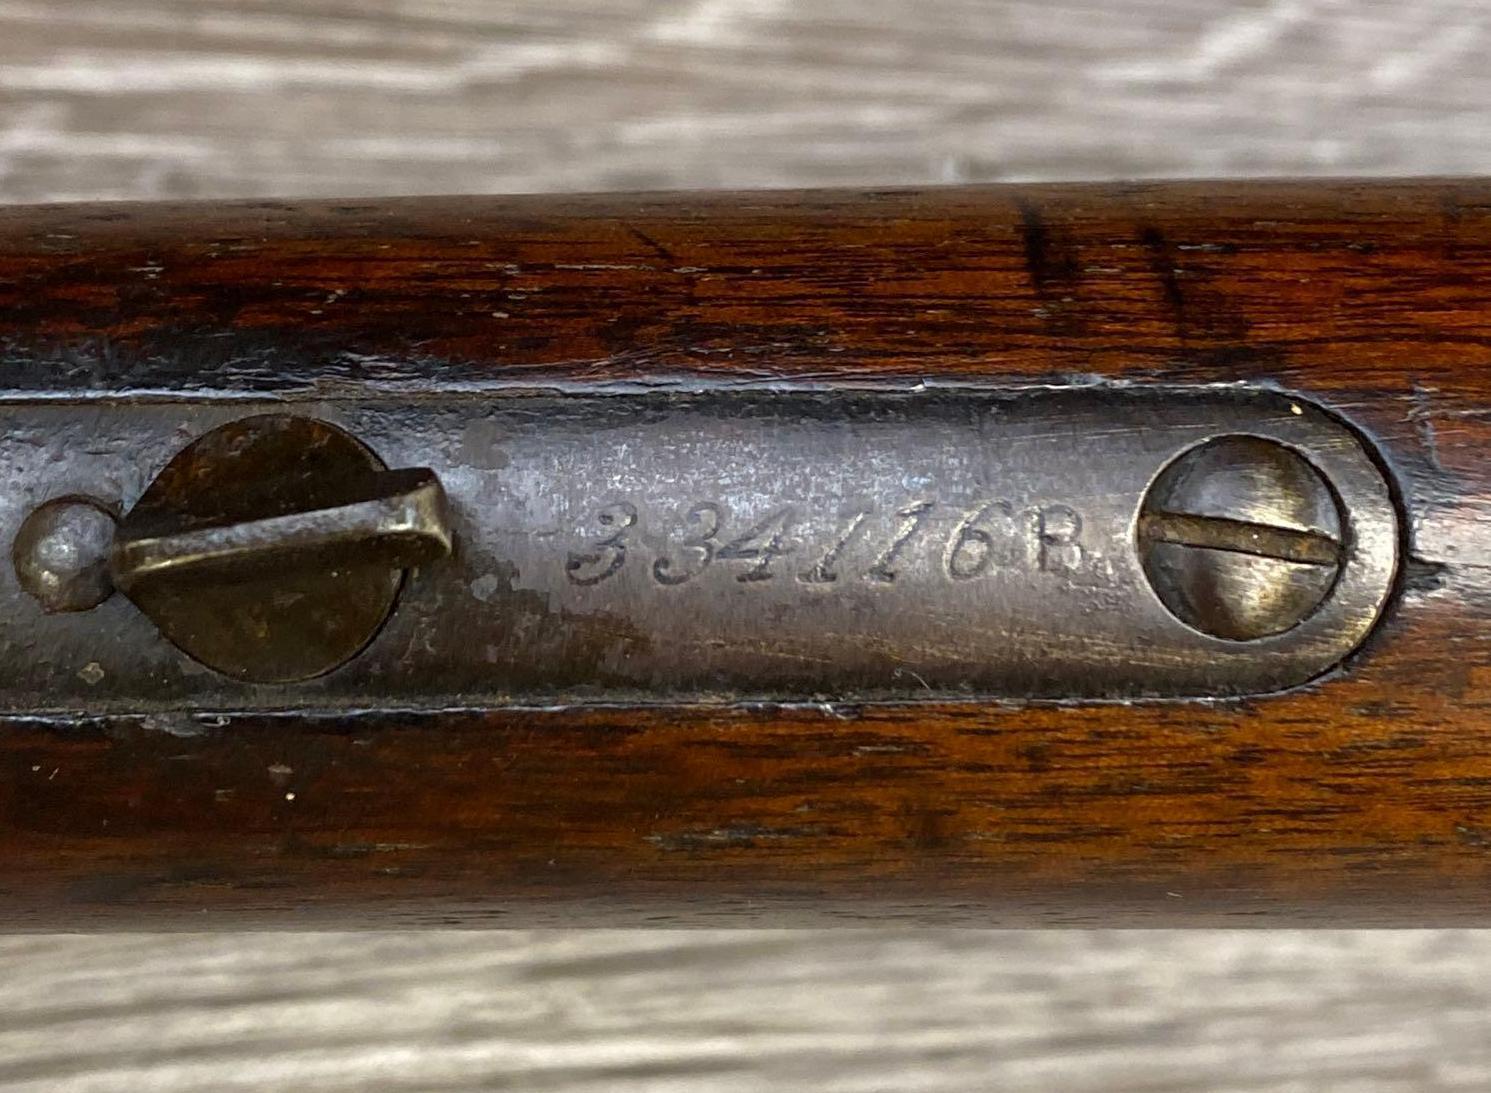 WINCHESTER MODEL 1873 .44 WCF CAL. LEVER-ACTION RIFLE SHORTENED TO 23" (CIRCA 1890).